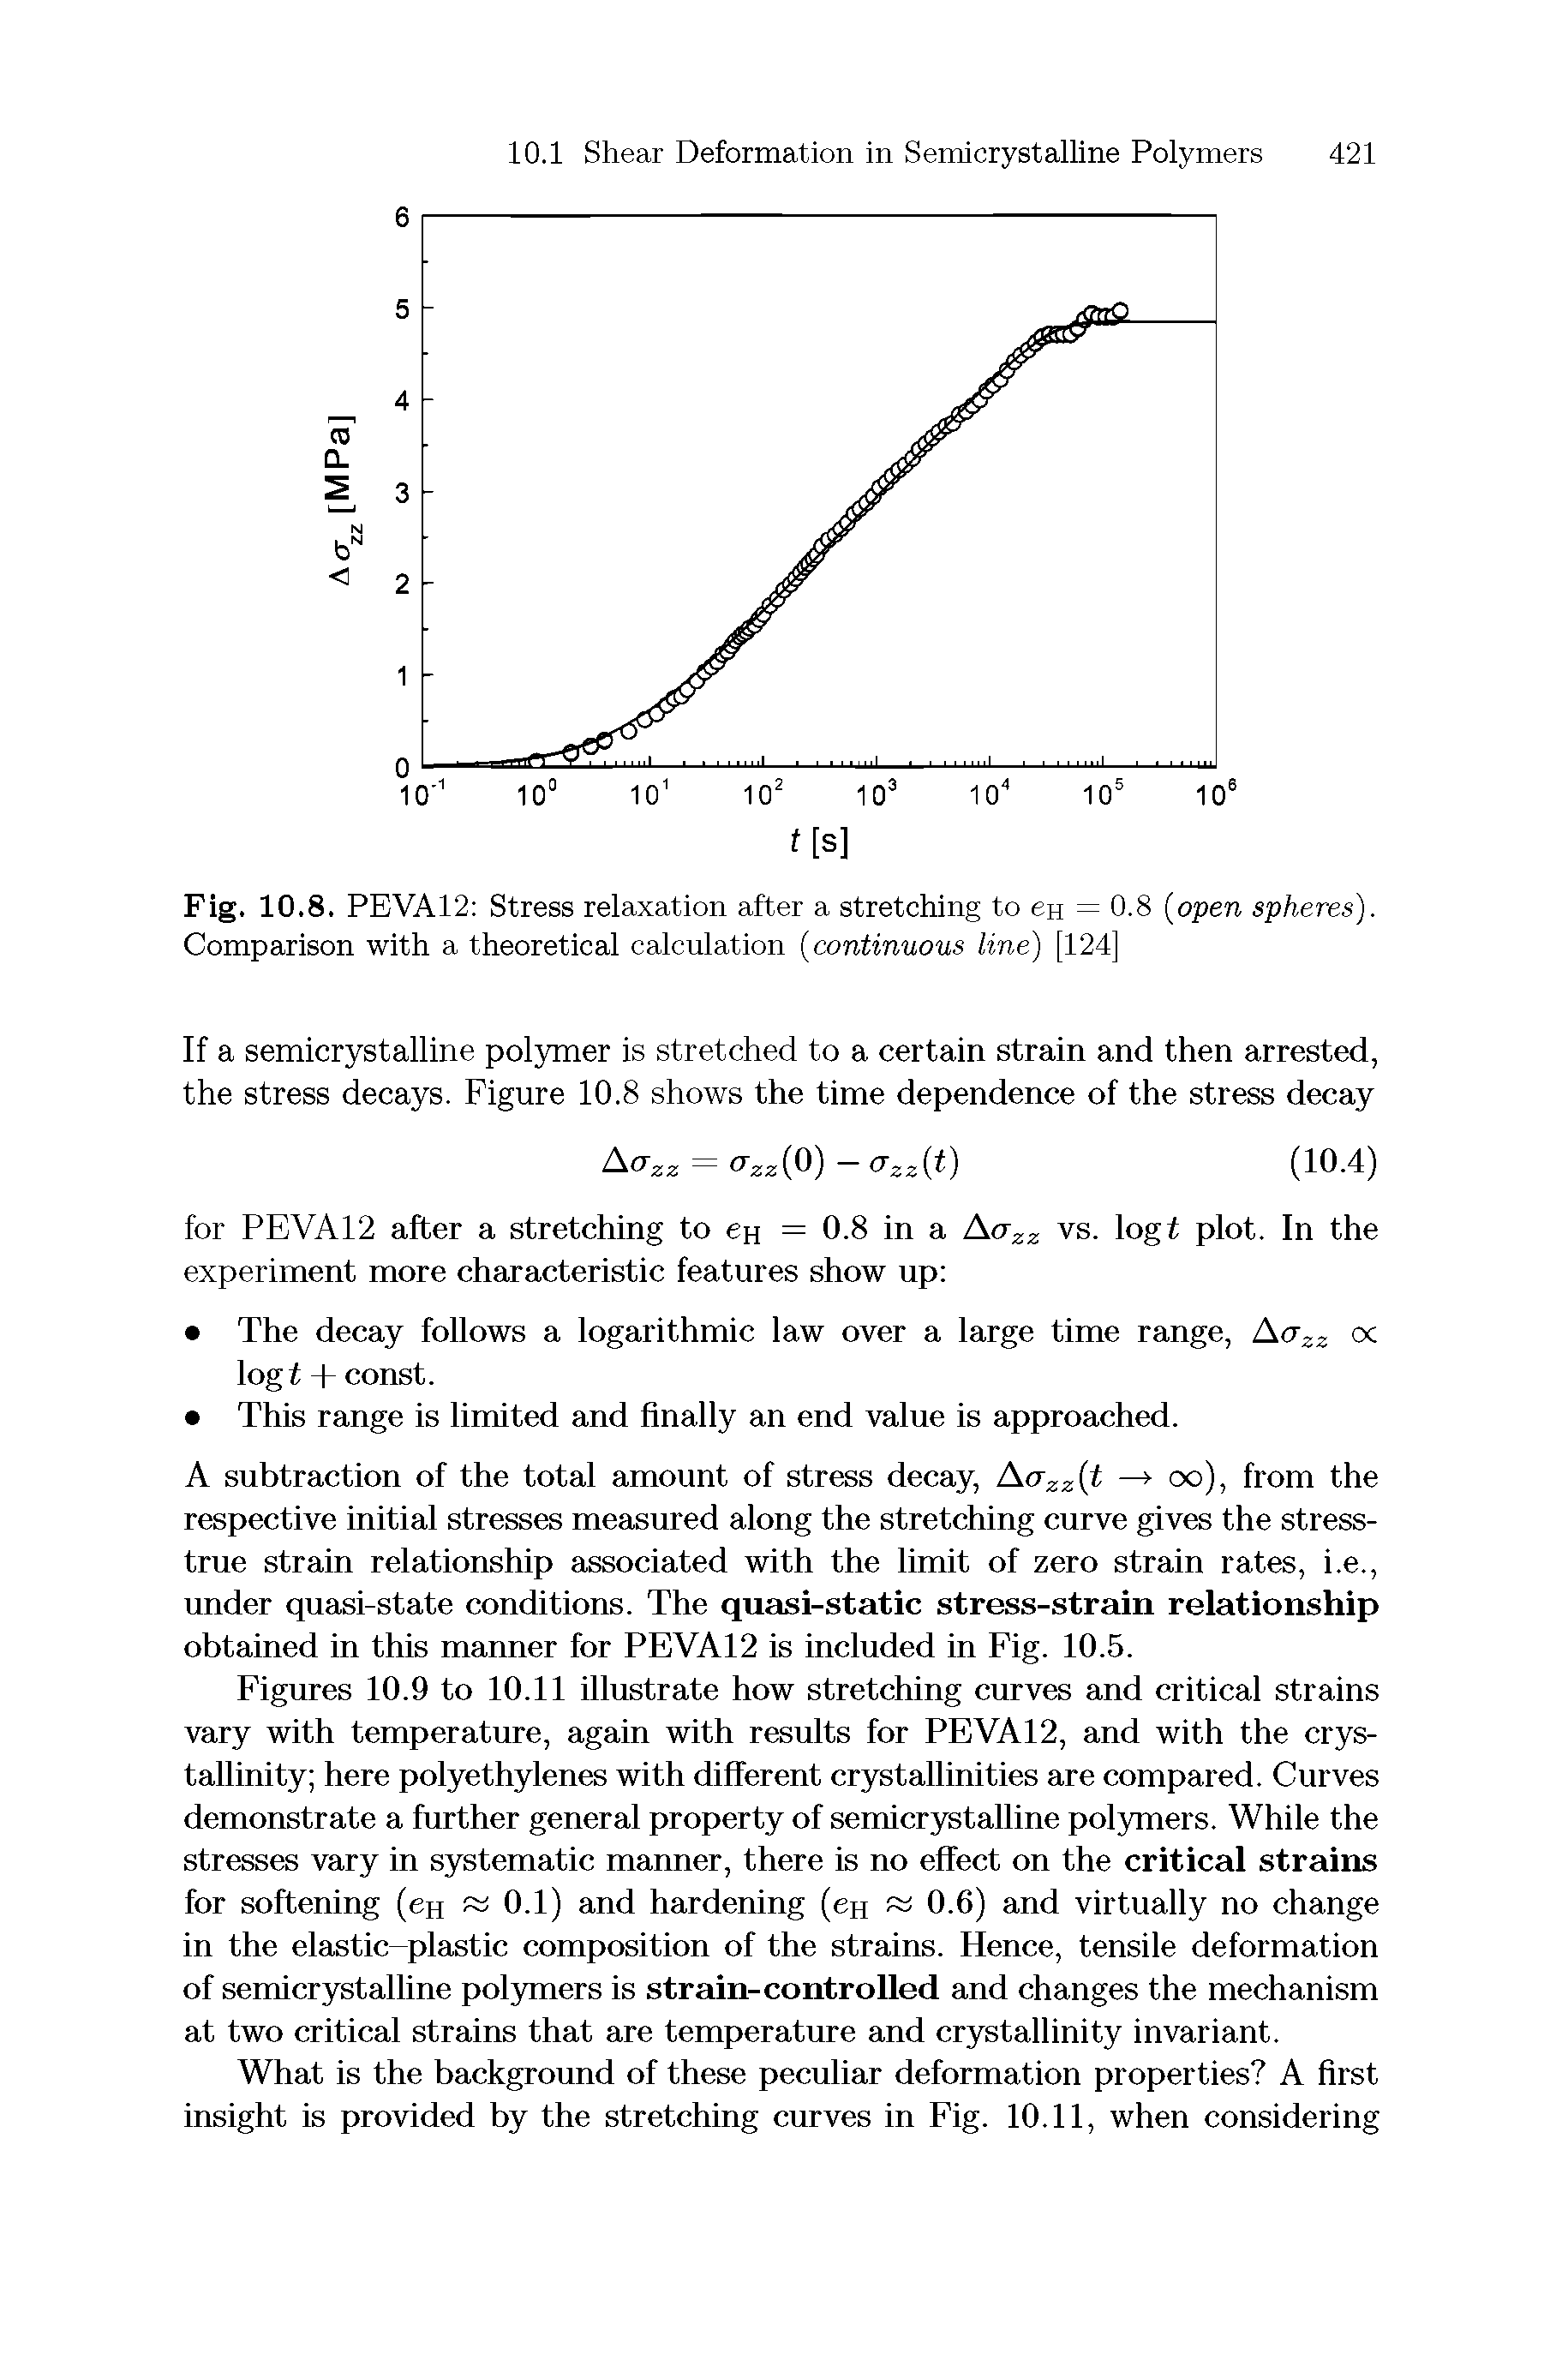 Figures 10.9 to 10.11 illustrate how stretching curves and critical strains vary with temperature, again with results for PEVA12, and with the crystallinity here polyethylenes with different crystallinities are compared. Curves demonstrate a further general property of semicr3 talline pol5oners. While the stresses vary in systematic manner, there is no effect on the critical strains for softening (en 0.1) and hardening (en 0.6) and virtually no change in the elastic-plastic composition of the strains. Hence, tensile deformation of semicrystalline polymers is strain-controlled and changes the mechanism at two critical strains that are temperature and crystallinity invariant.